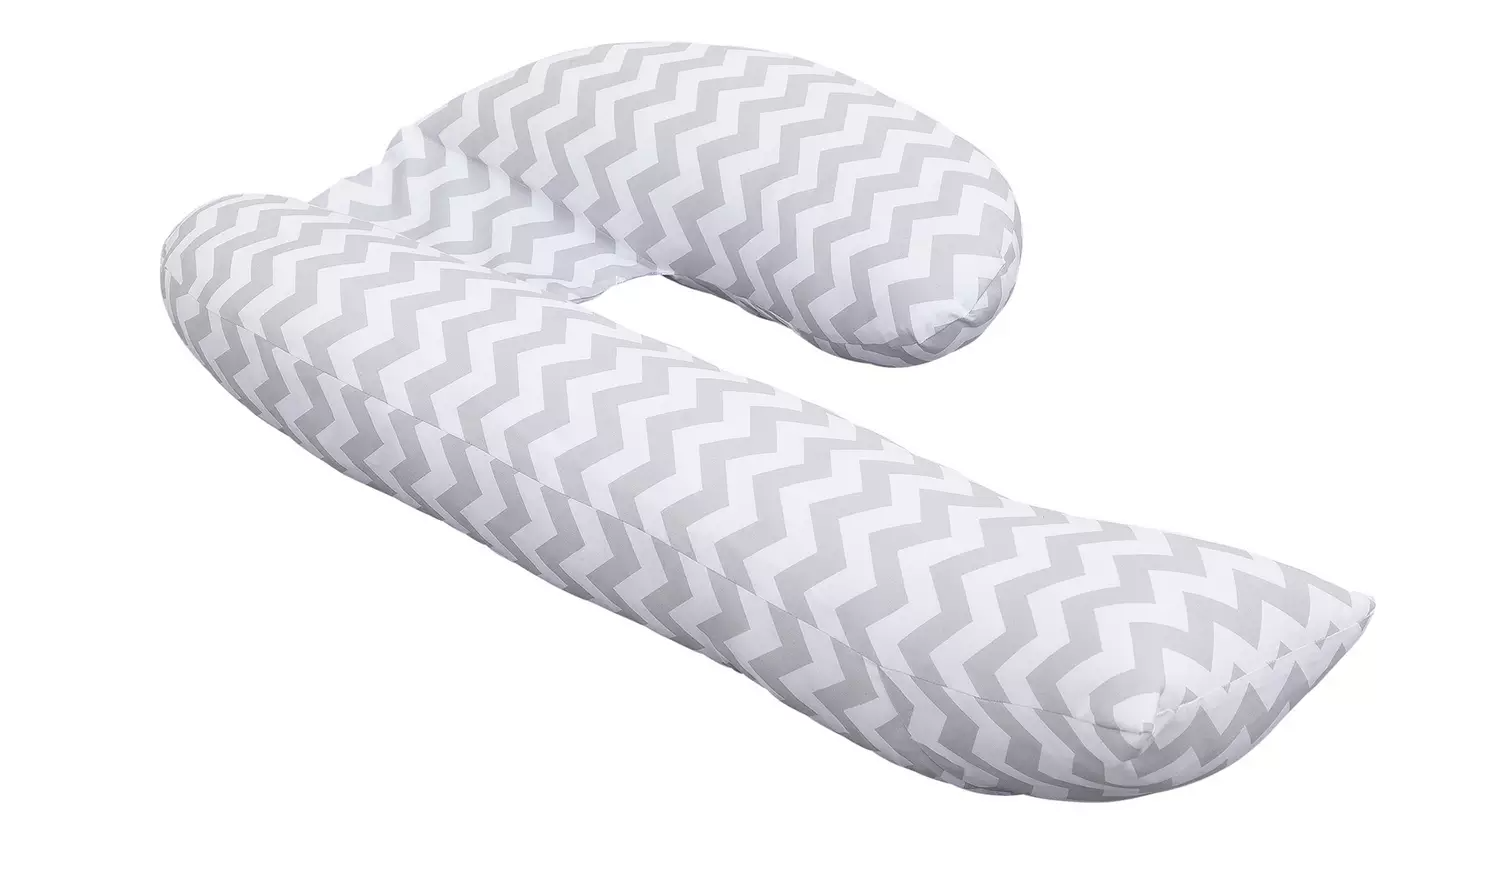 Cuggl Deluxe Maternity Body Pillow